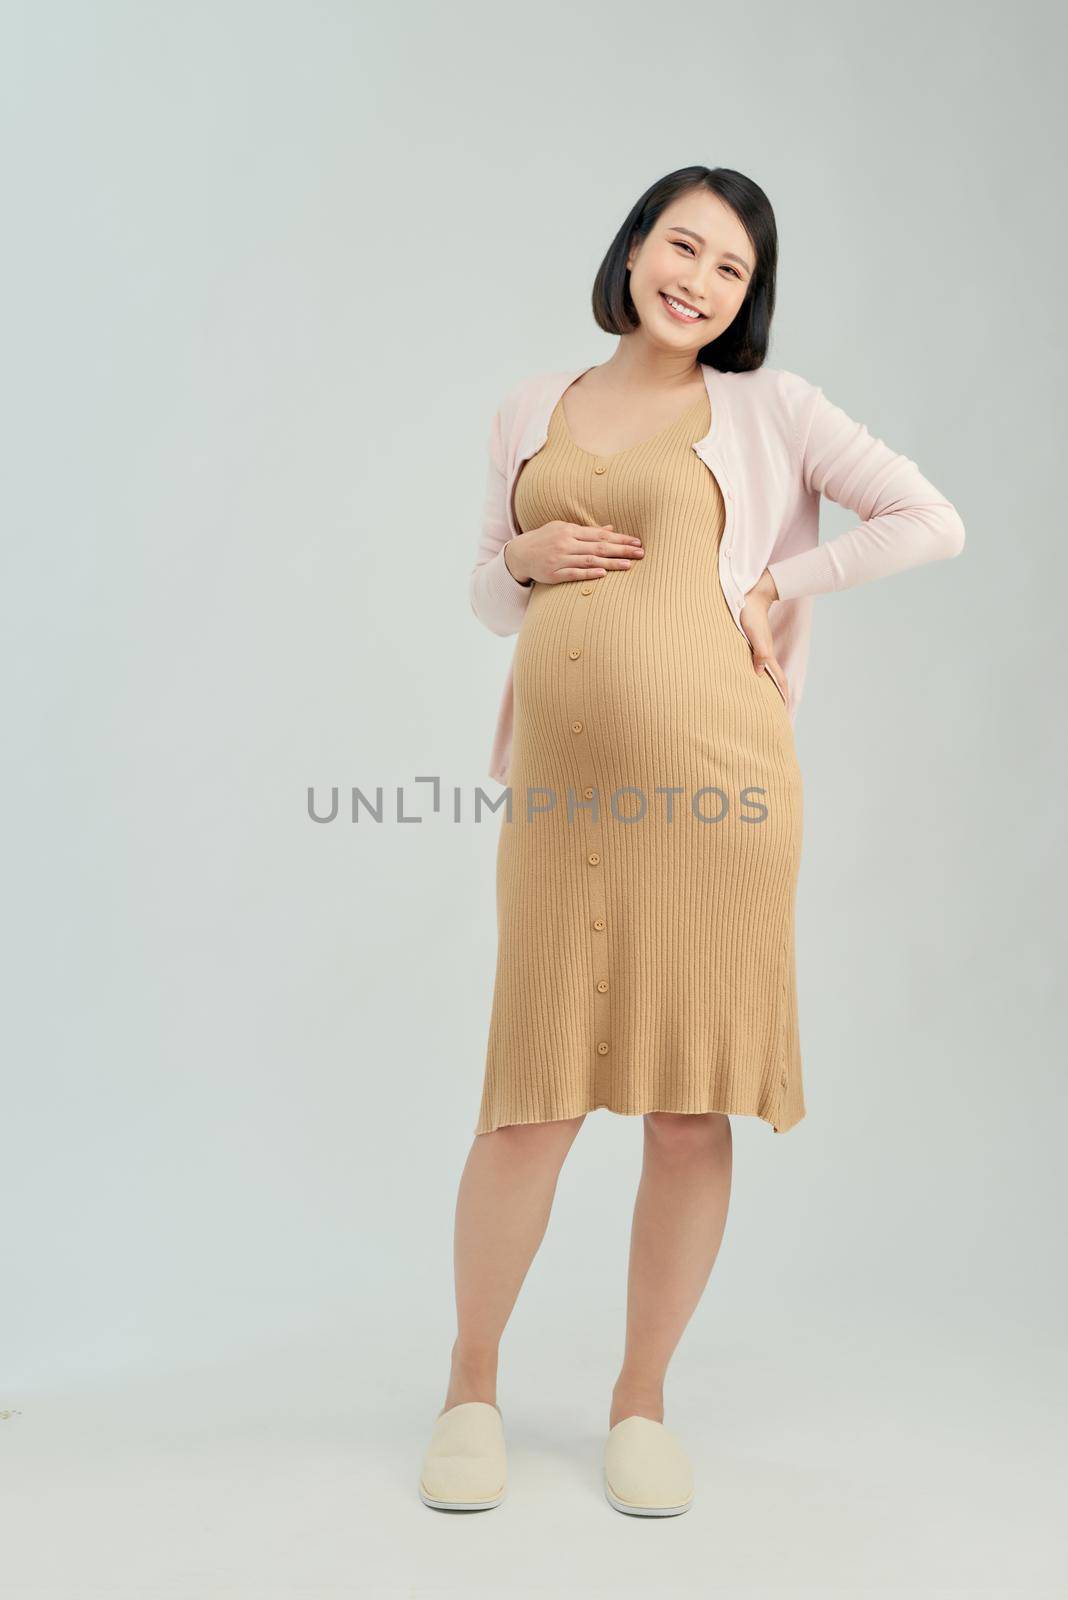 Pregnant woman on light background by makidotvn